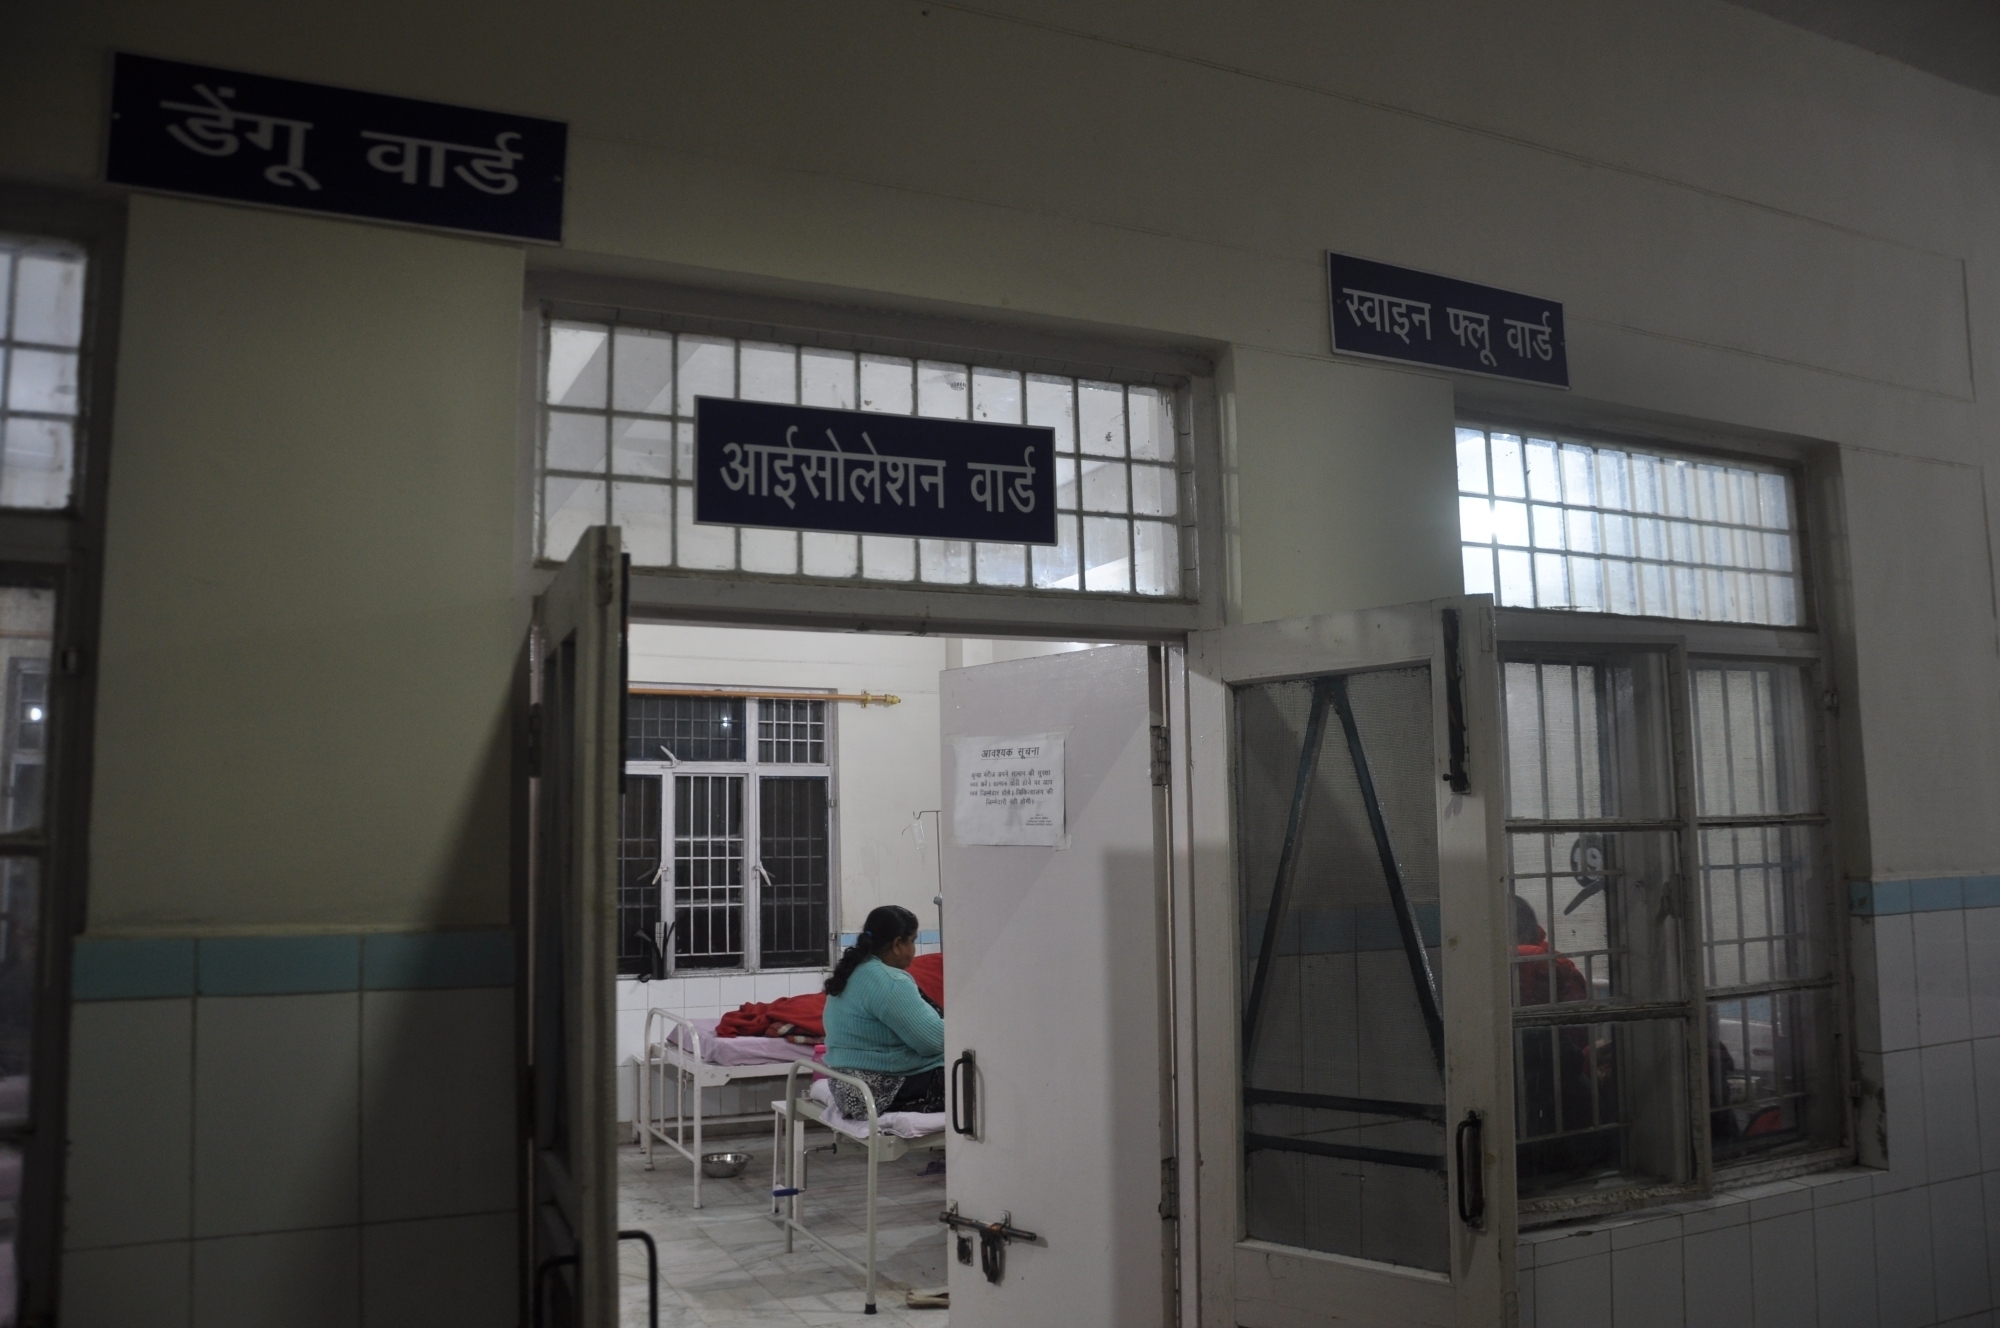 Medicare services disrupted in West Bengal for second day